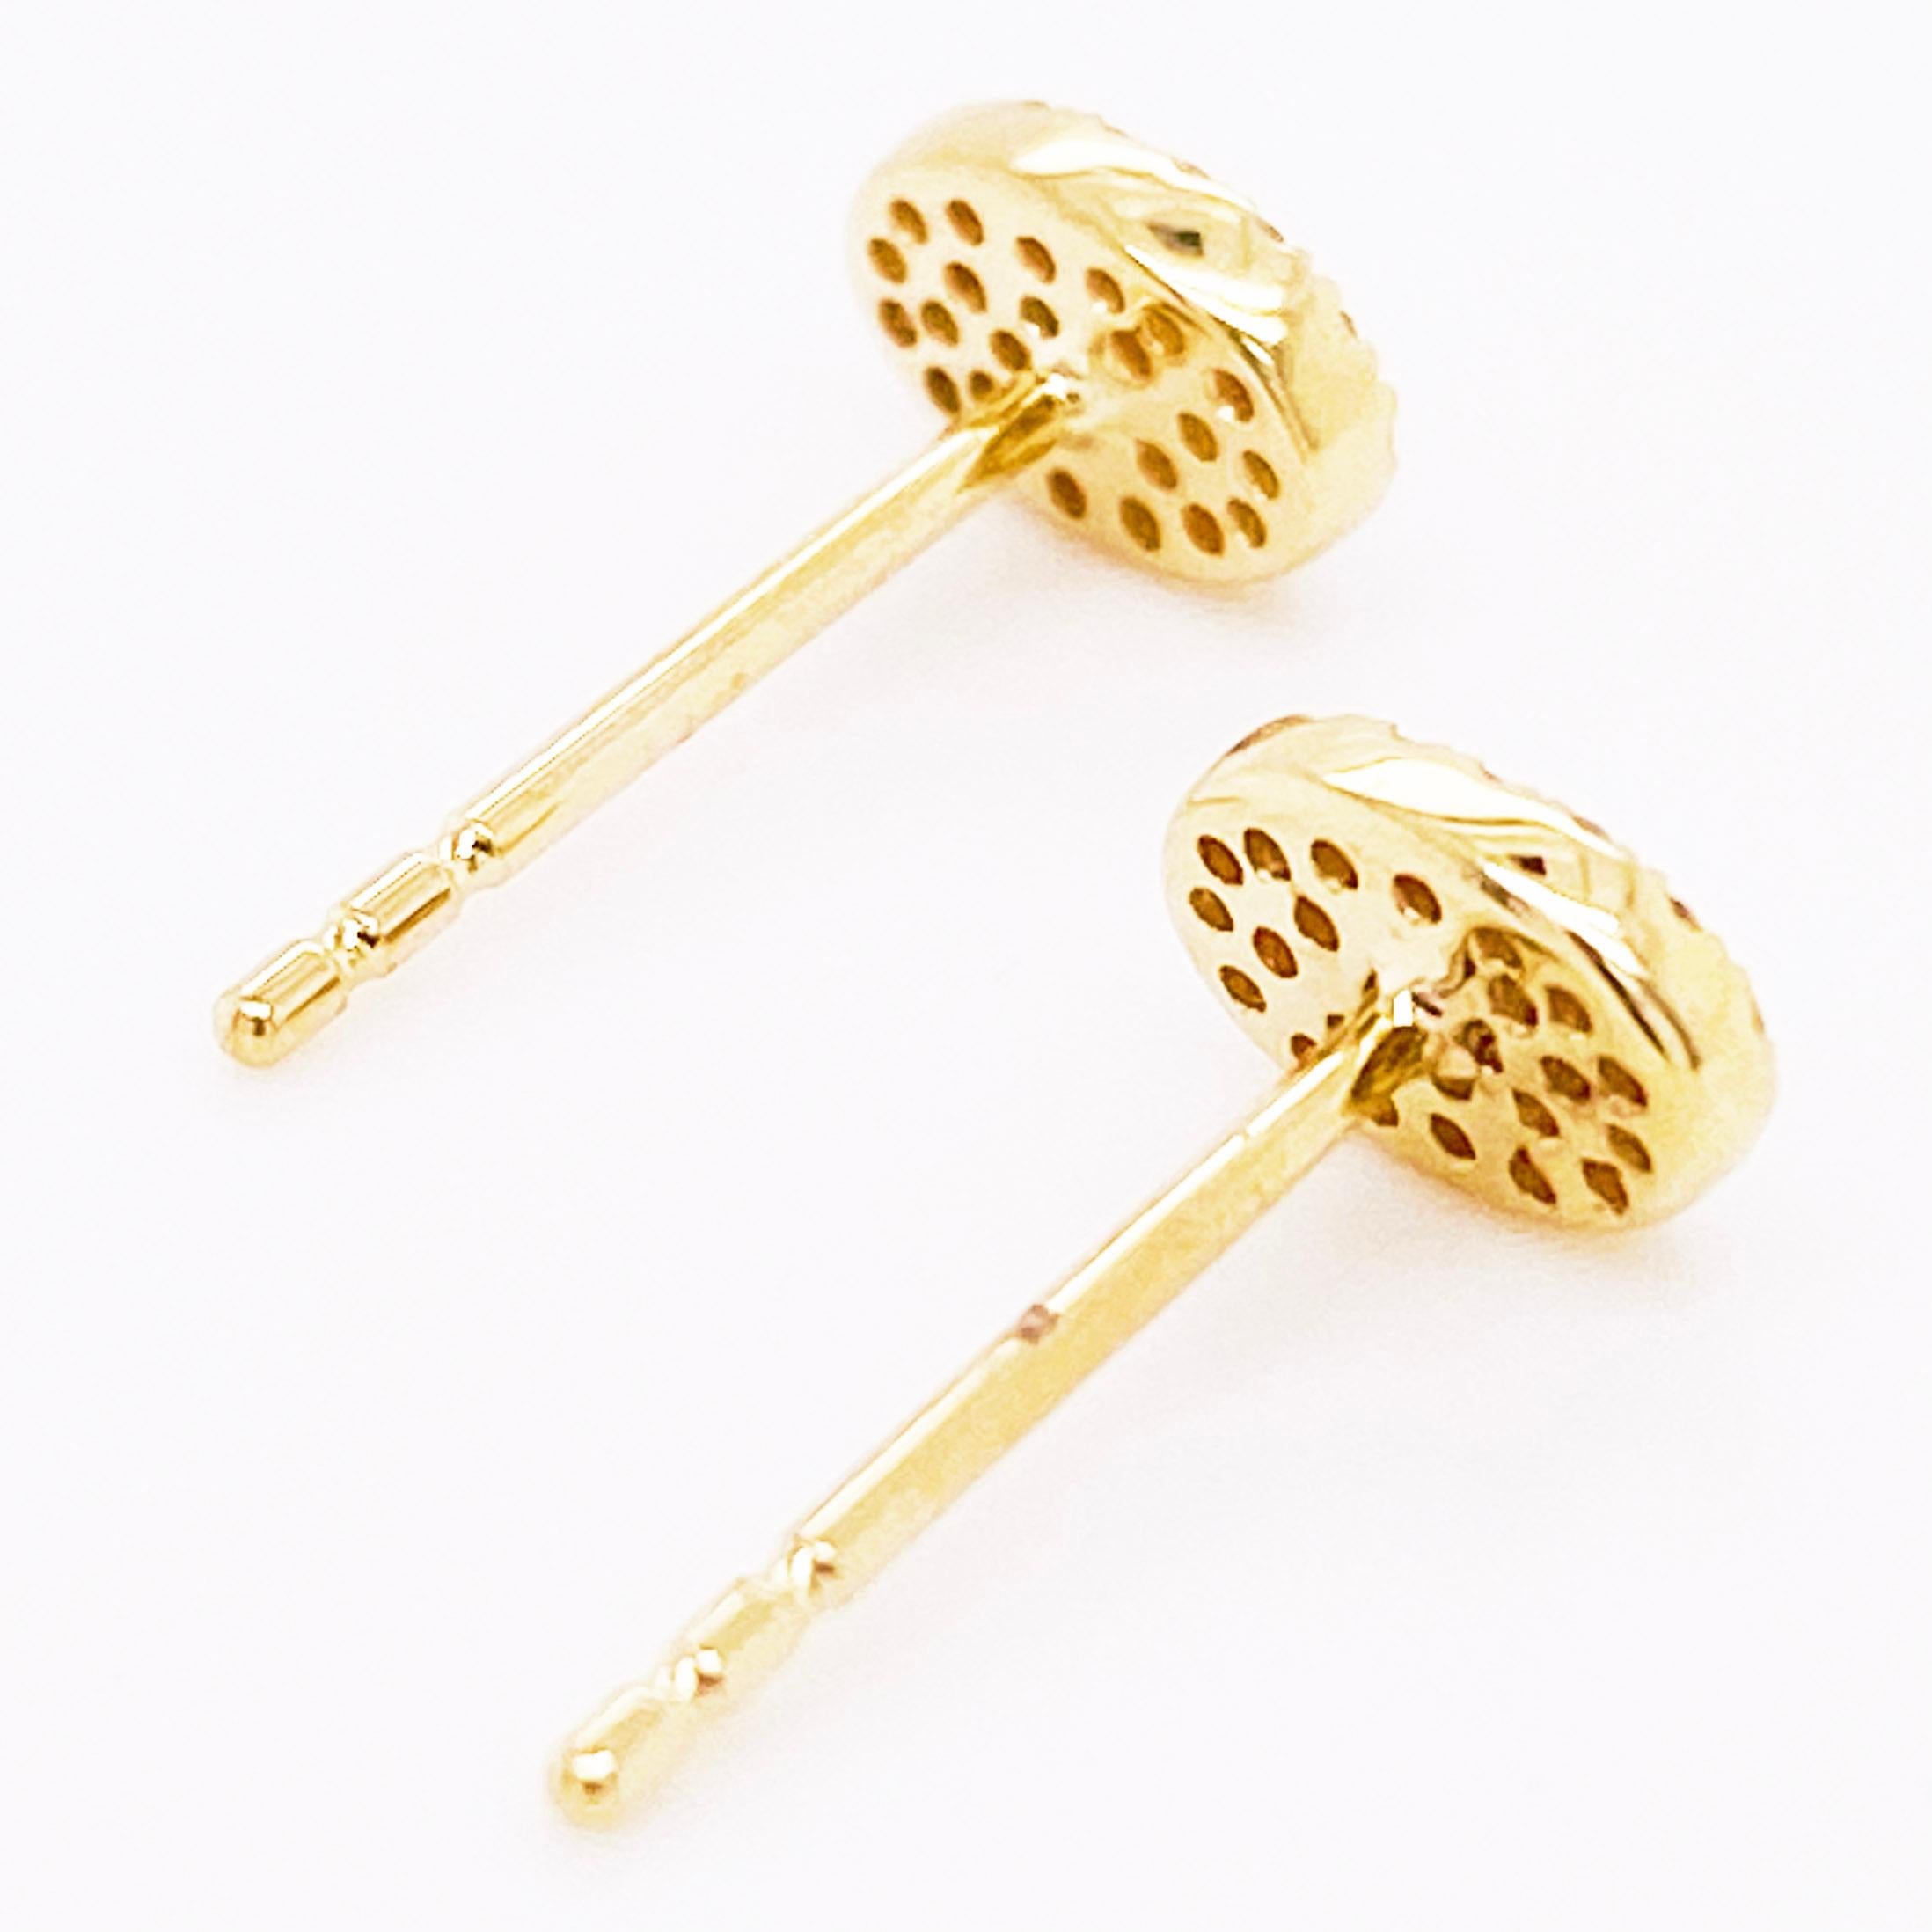 Pave Diamond Earrings, Yellow Gold Oval Pave Studs, Diamond Studs In New Condition For Sale In Austin, TX